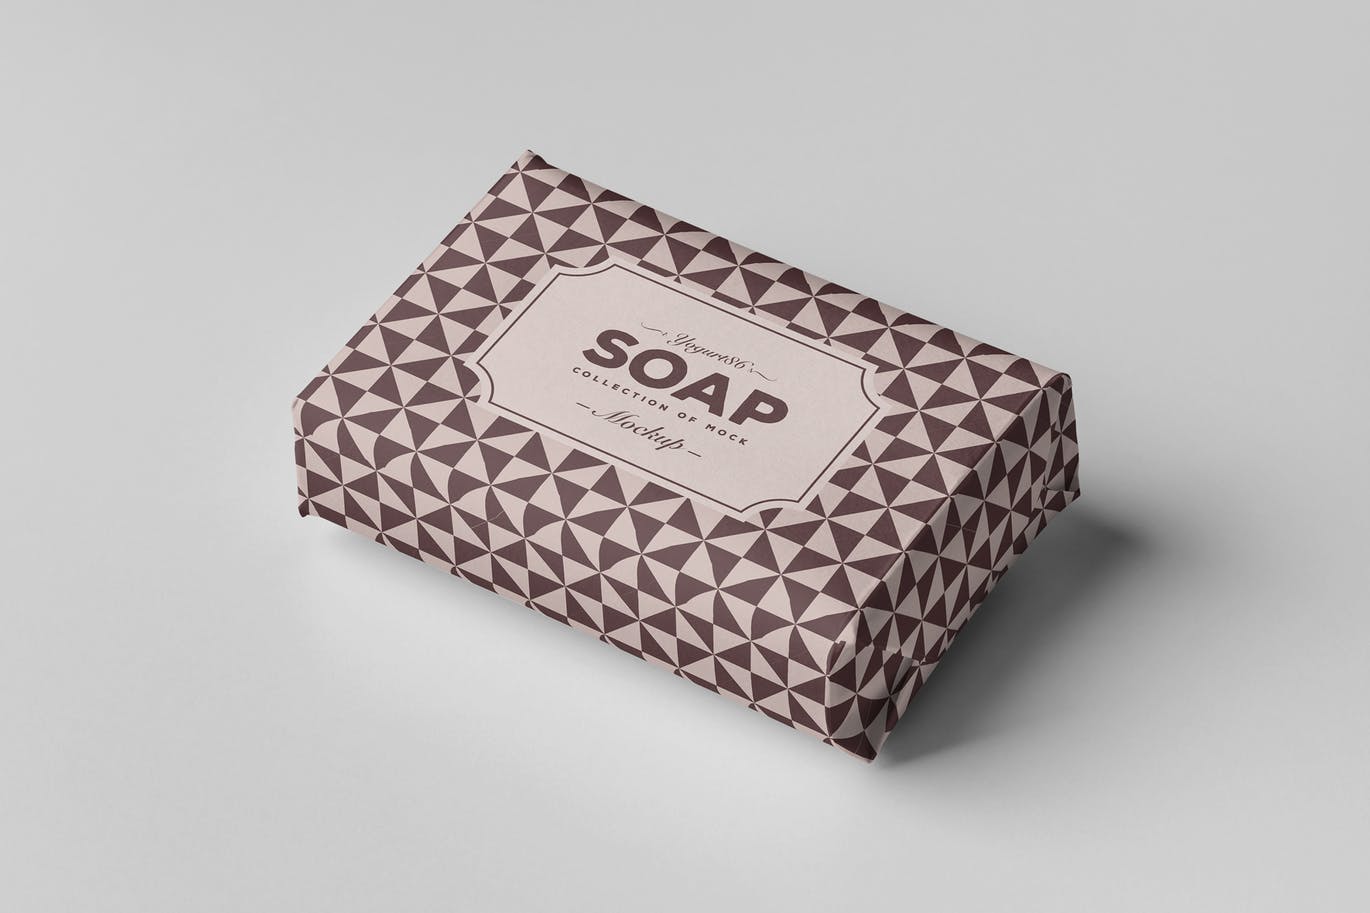 Download 35 Ultra Realistic Soap And Packaging Mockup Templates Decolore Net